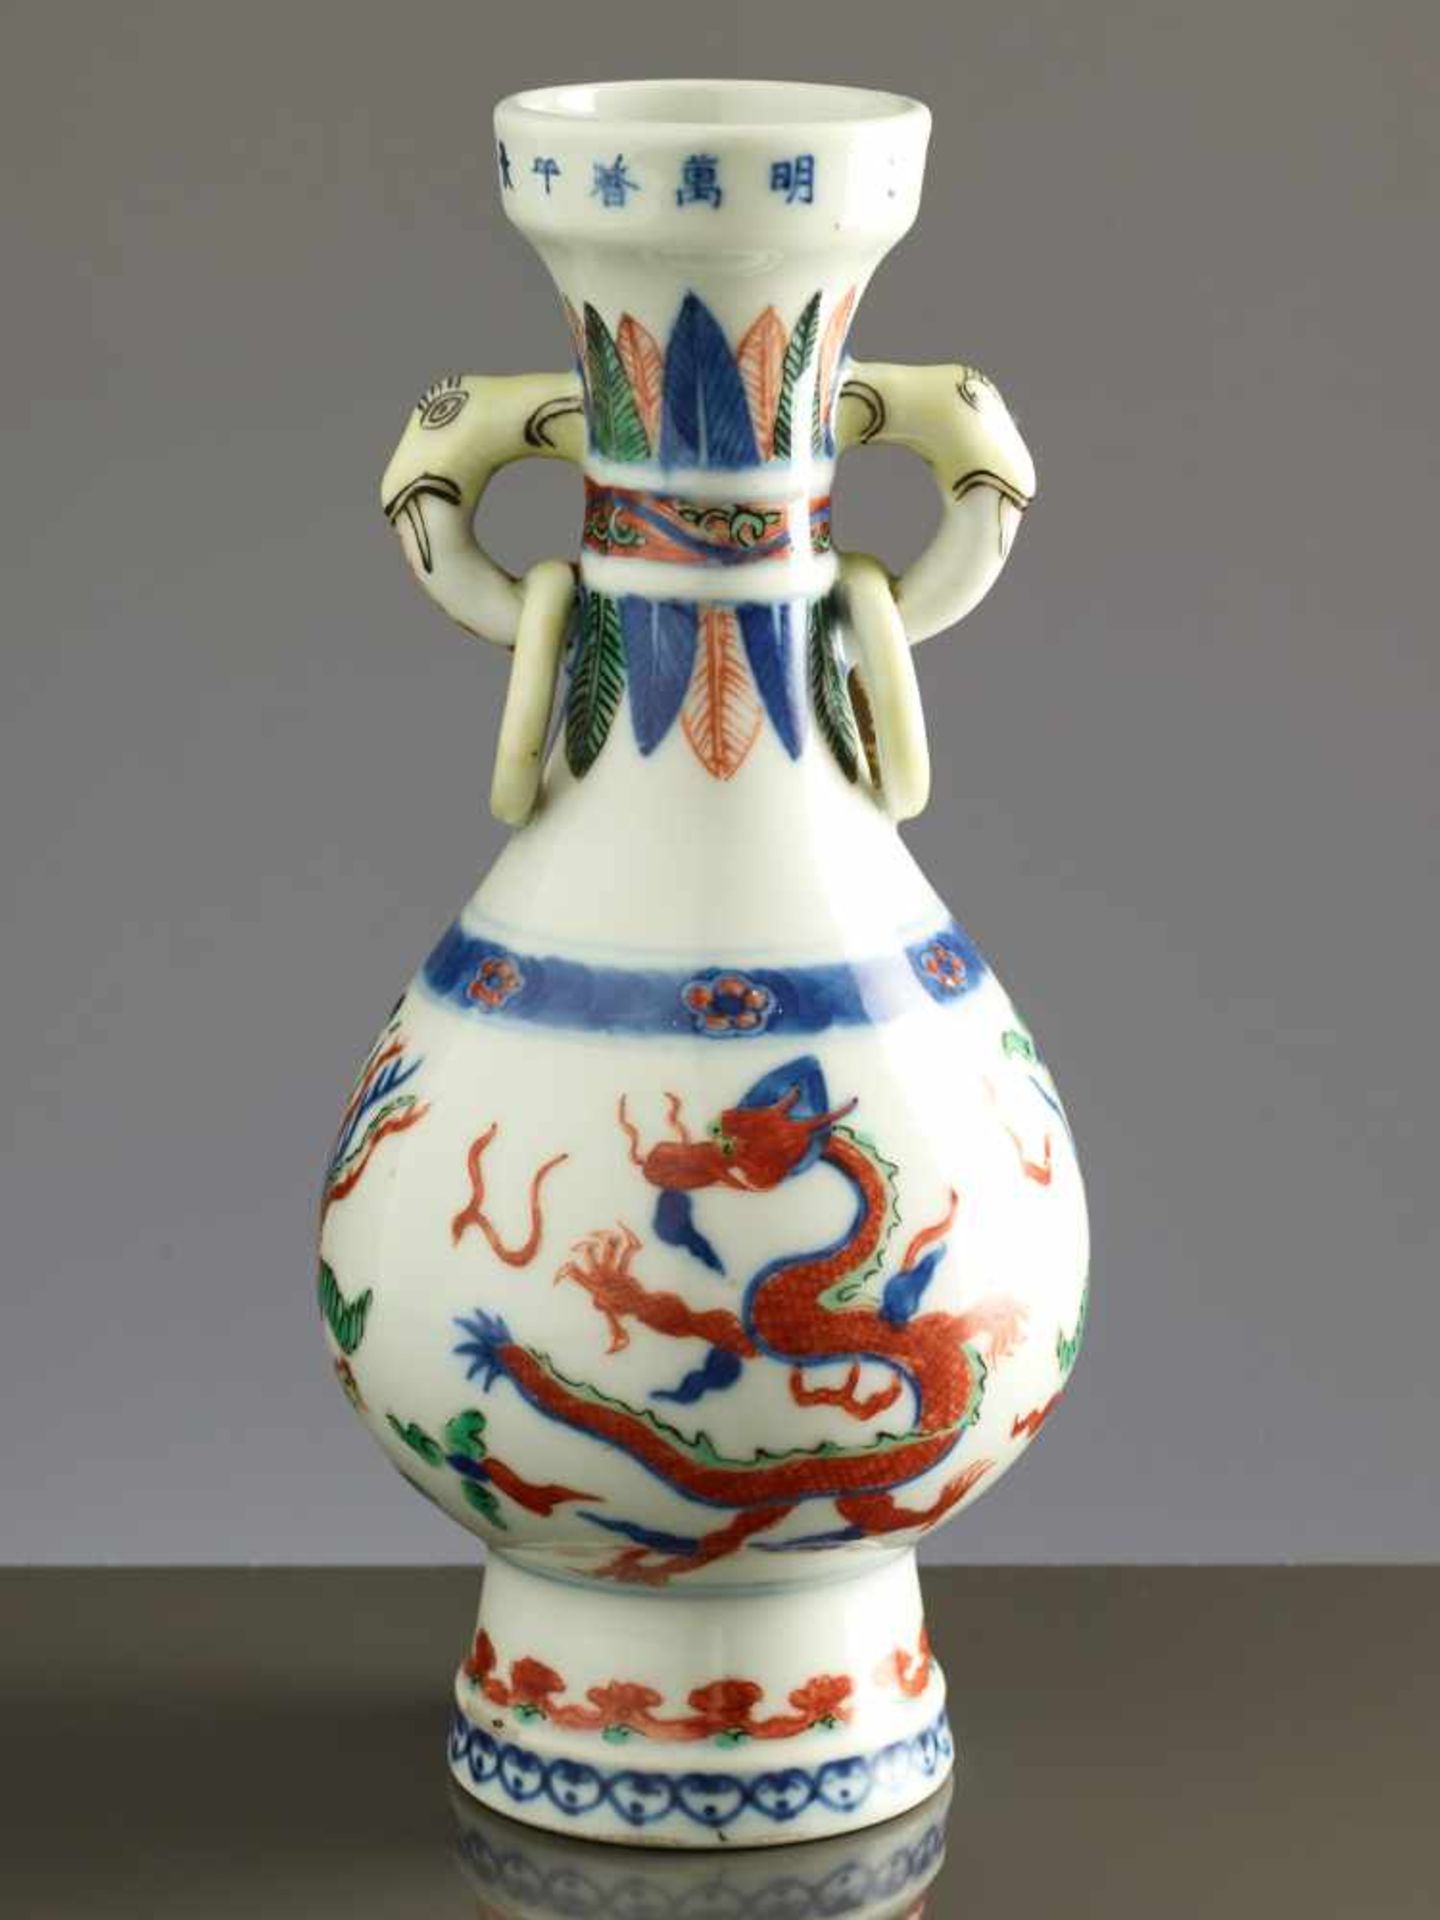 SMALL VASE WITH DRAGON AND PHOENIXWucai Porcelain China, Qing Dynasty 19th cent. to Republic Flat